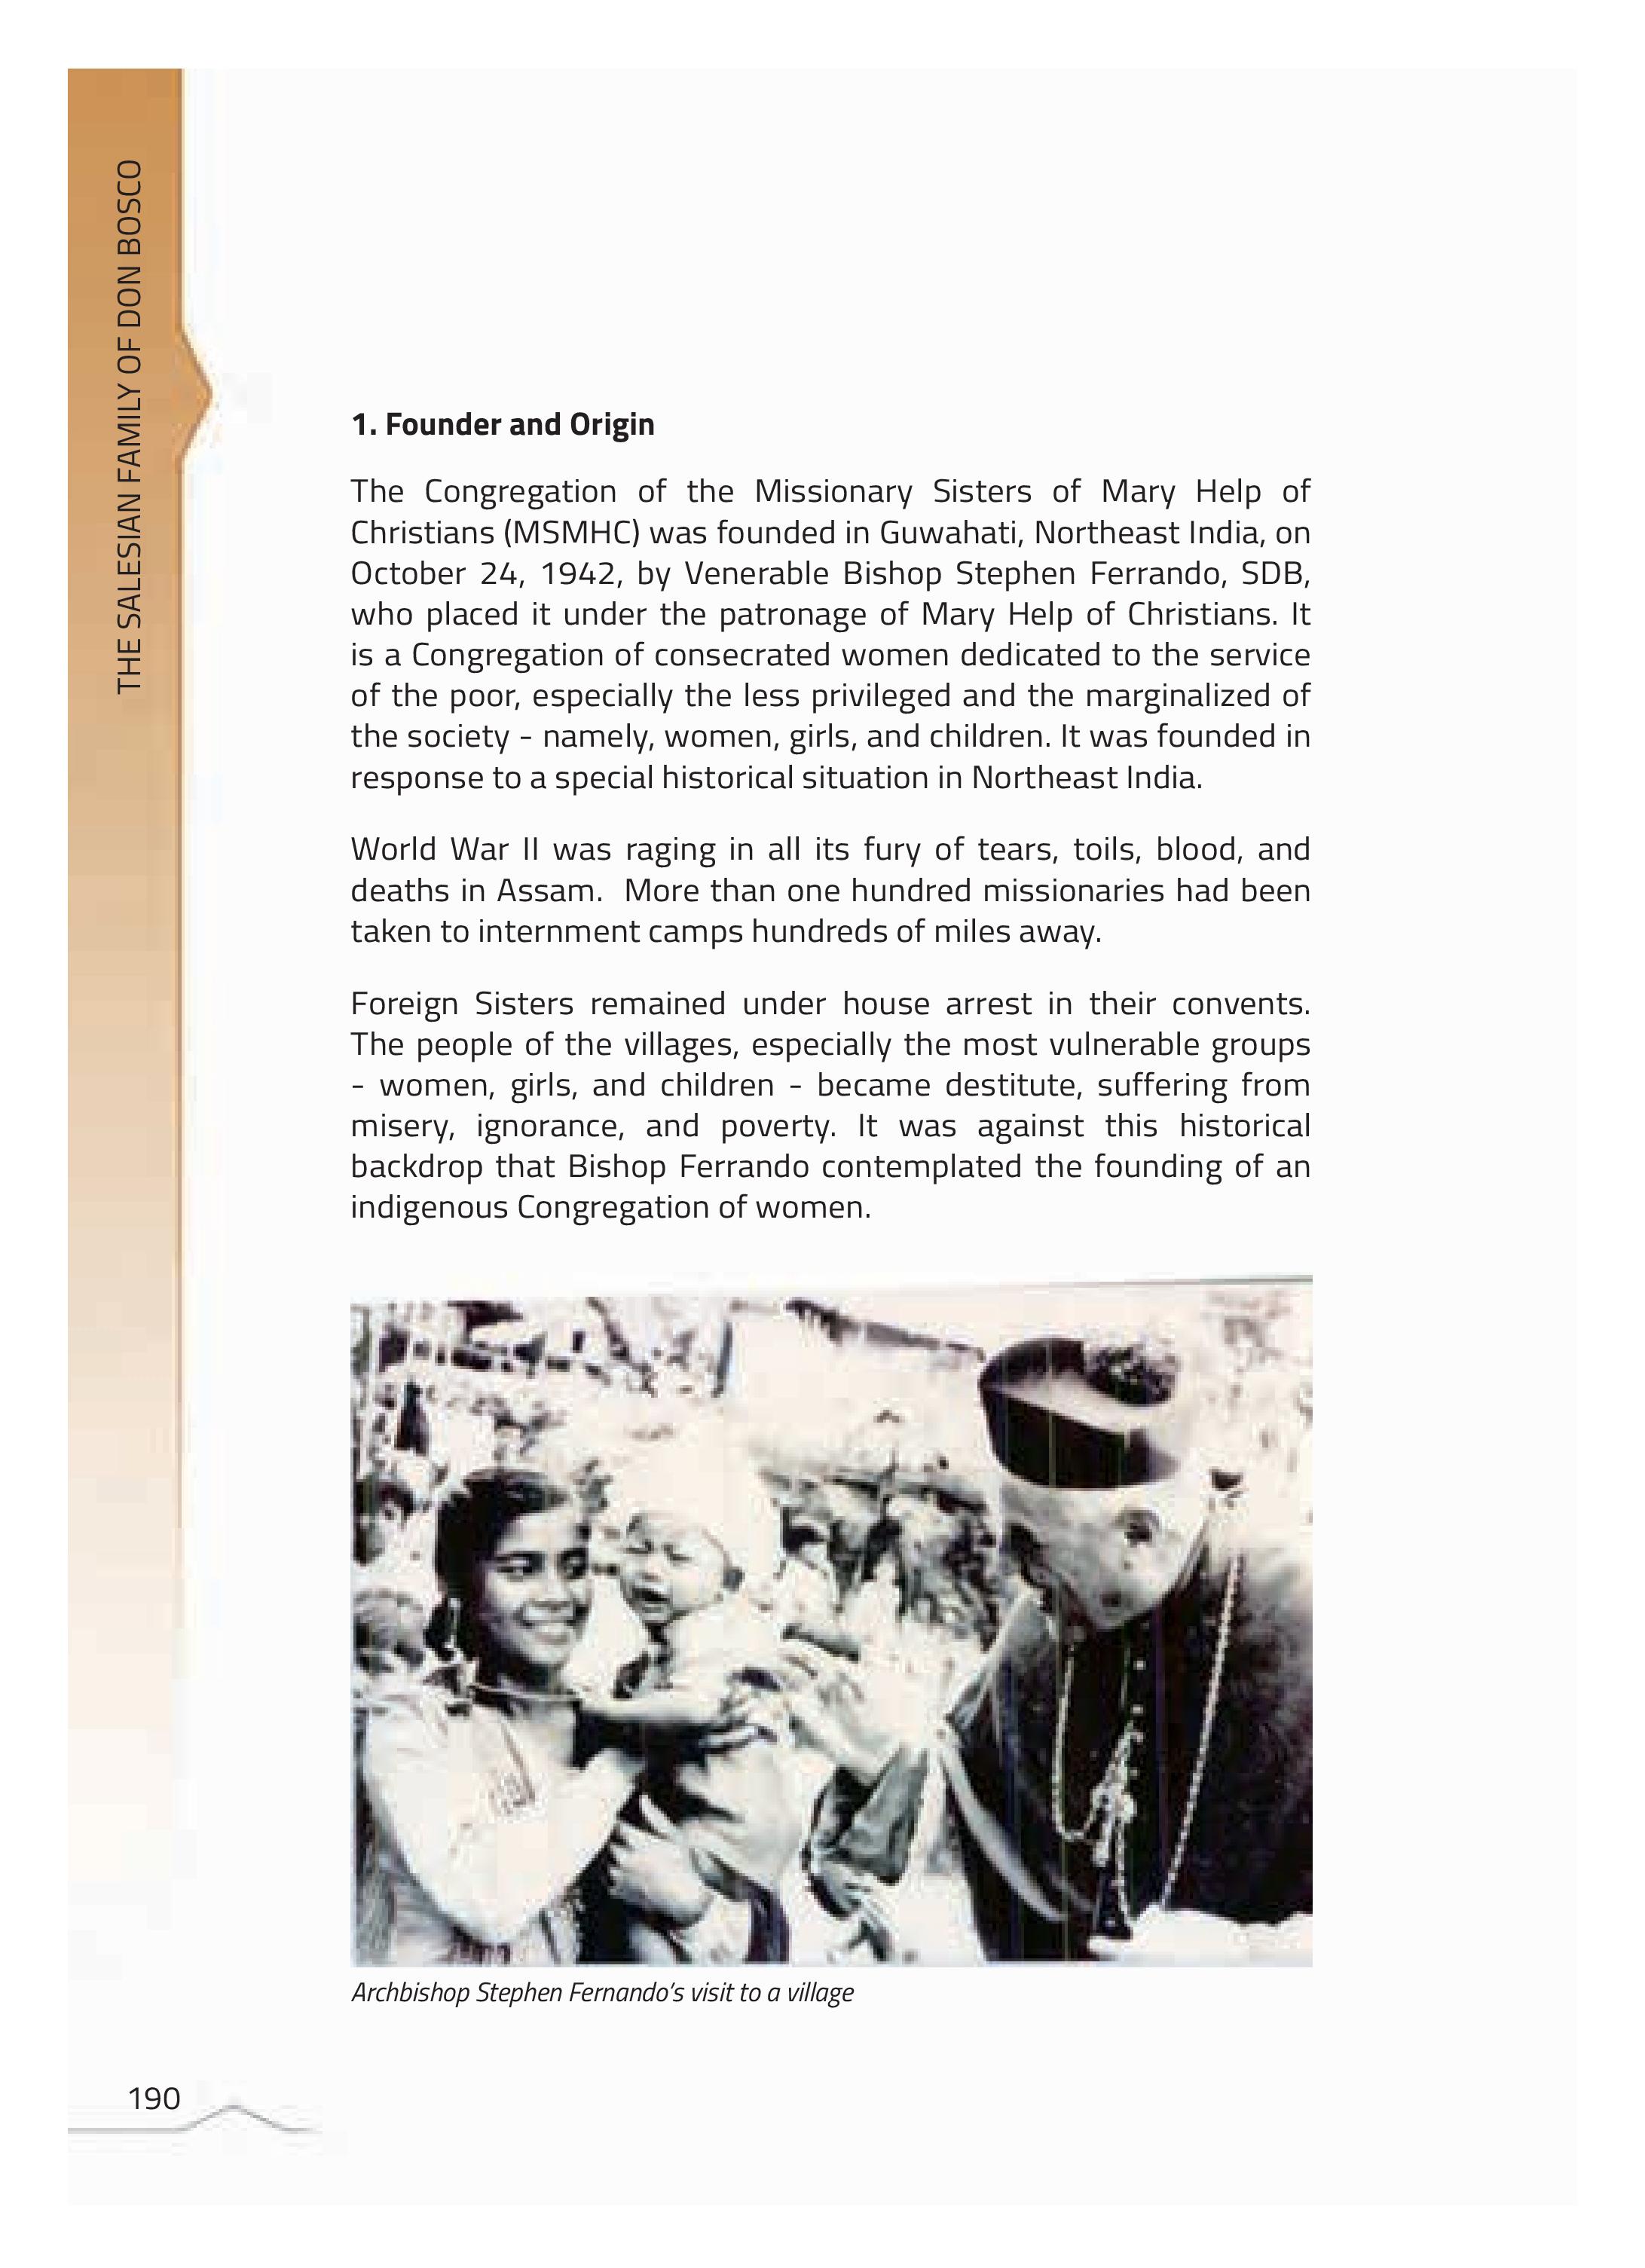 book the Salesian Family of DB-page-270.jpg